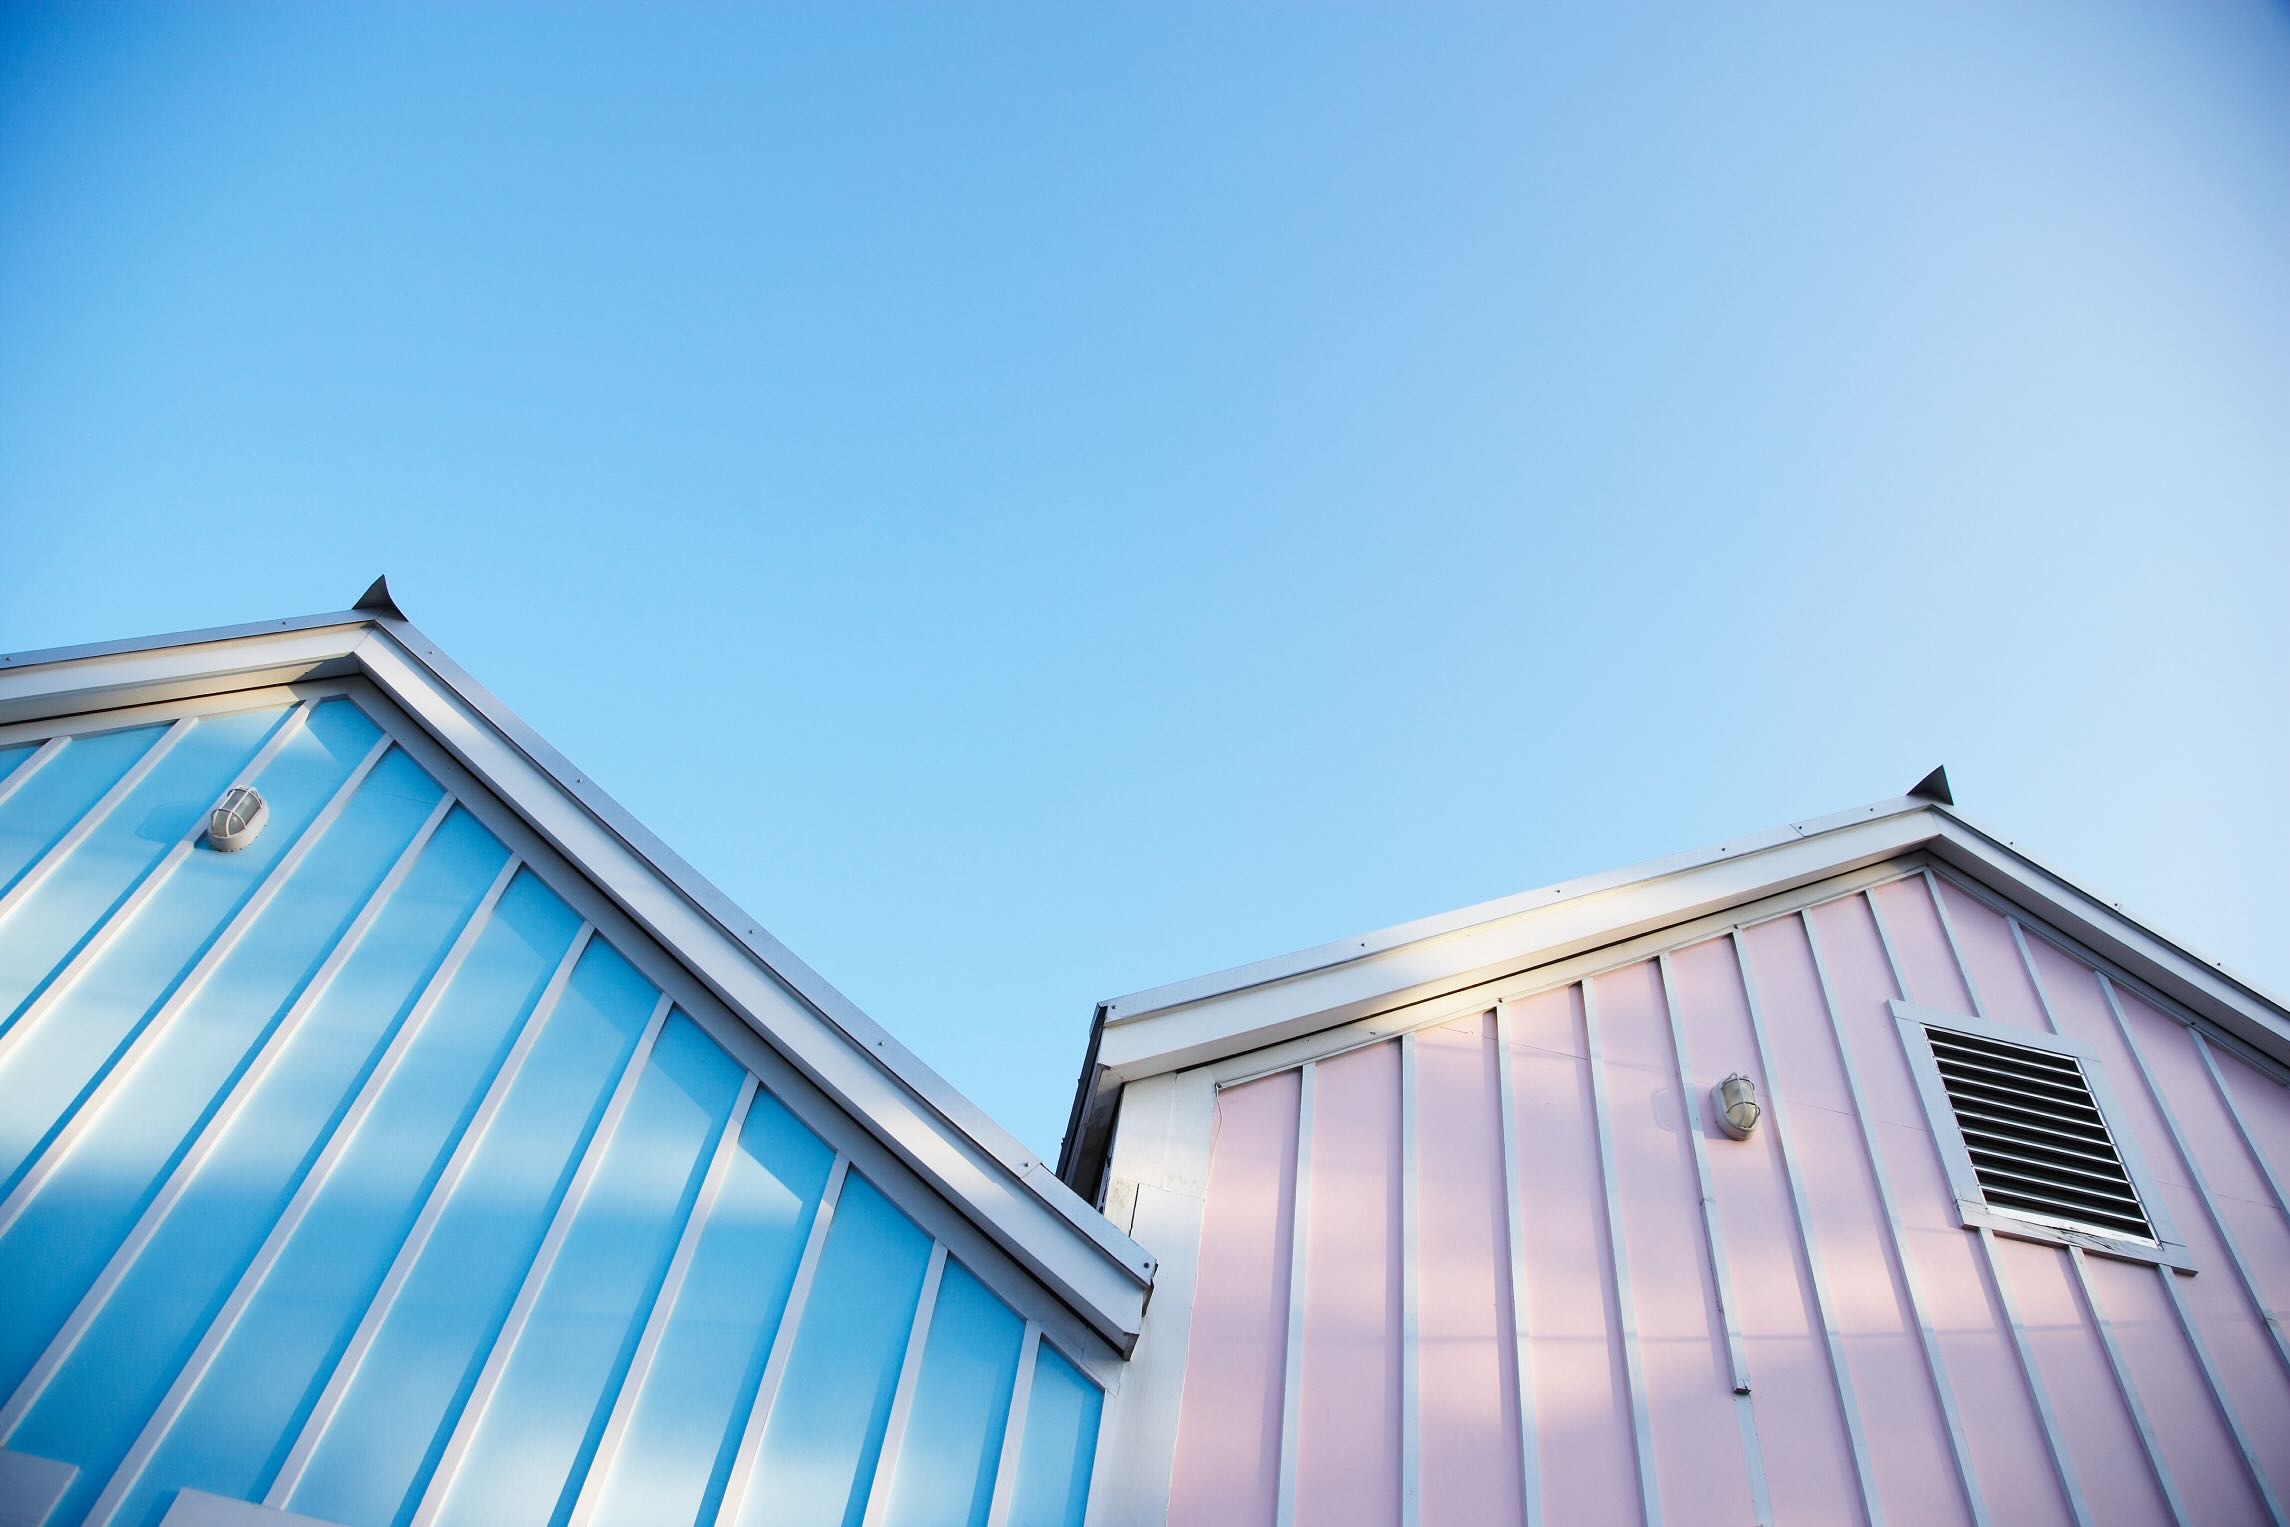 How To Measure A Gable For Siding